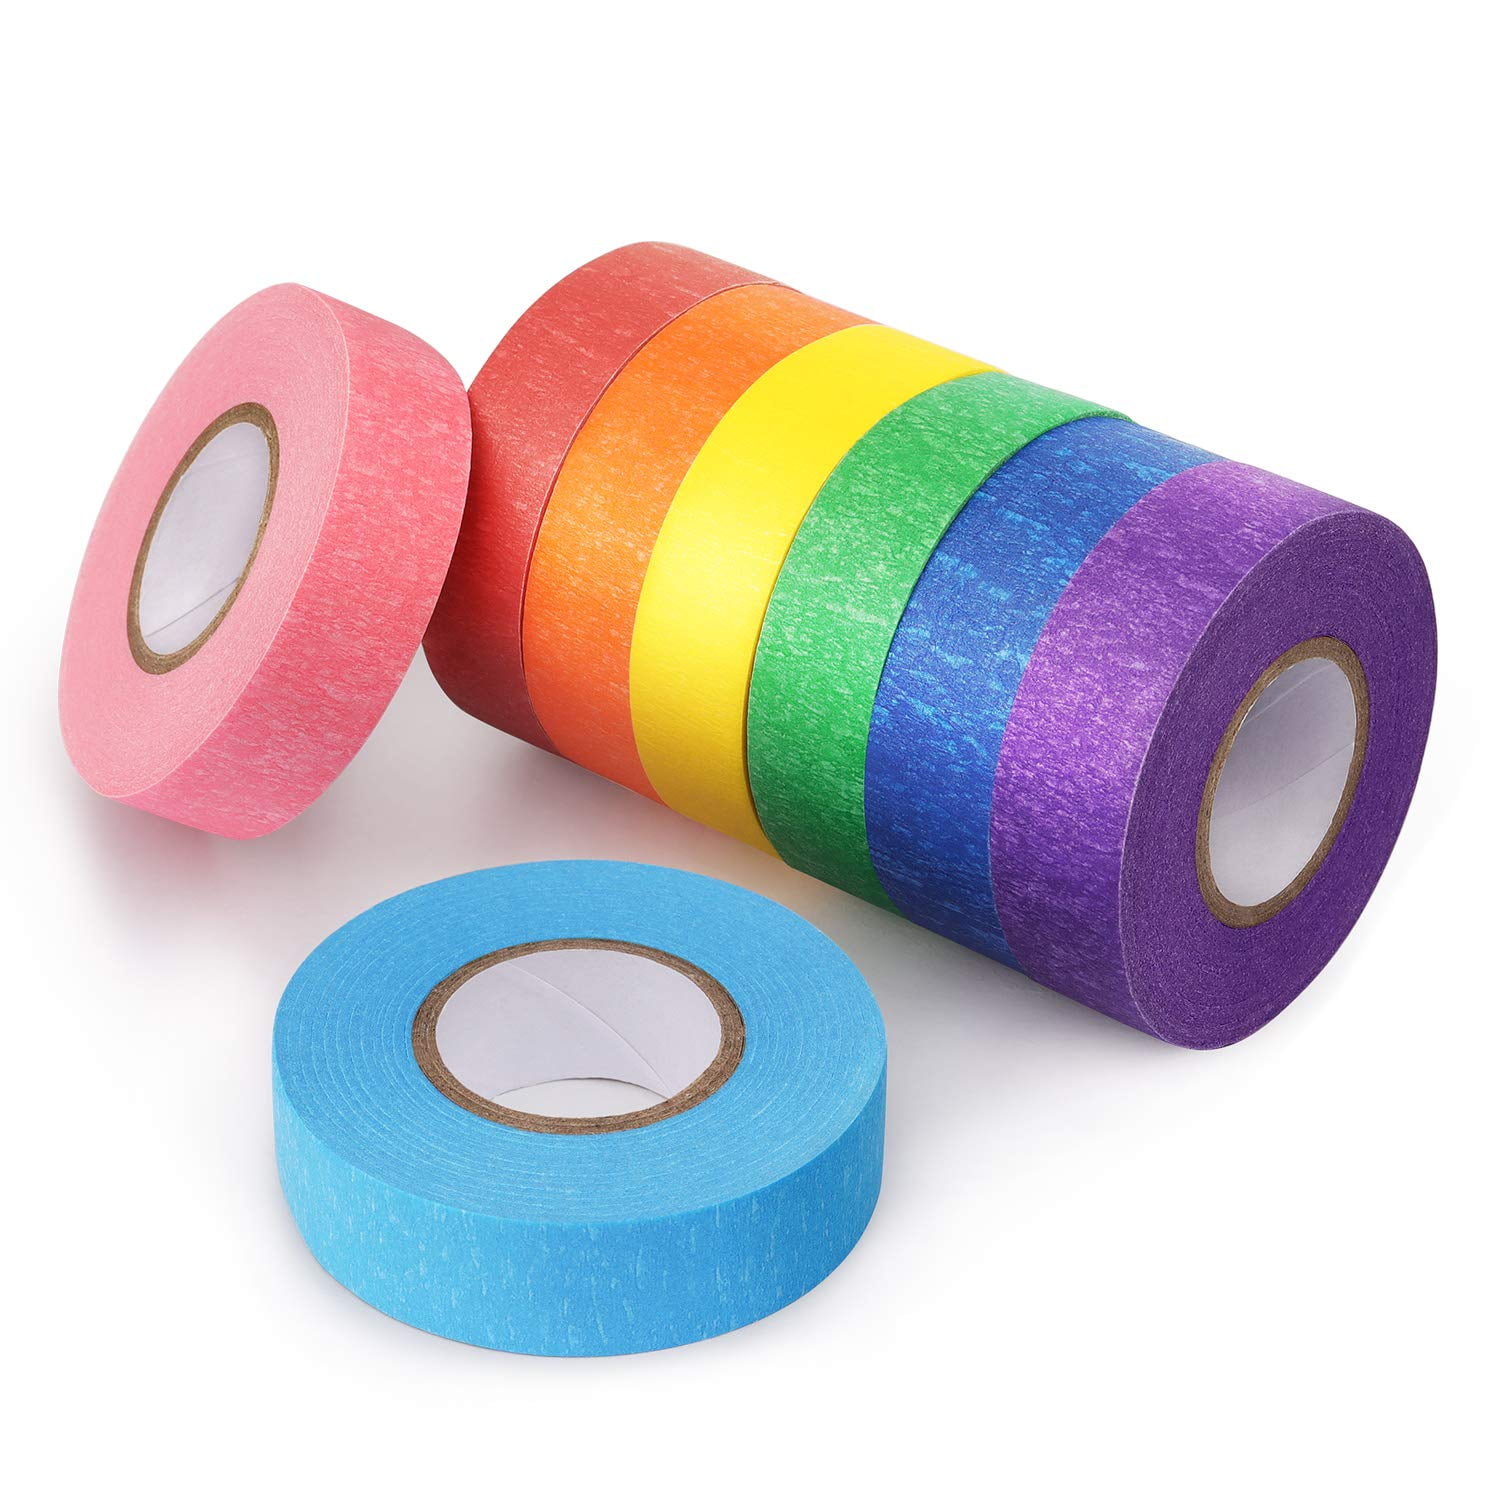 Colored Masking Tape Colorful Painter Tape Set 7 Different Color Rolls 13 Yards x Wide 0.24/0.5/1 inch for Kids Teachers Painters 21 Rolls Colored Painters Tape for Arts and Crafts with Scissors 